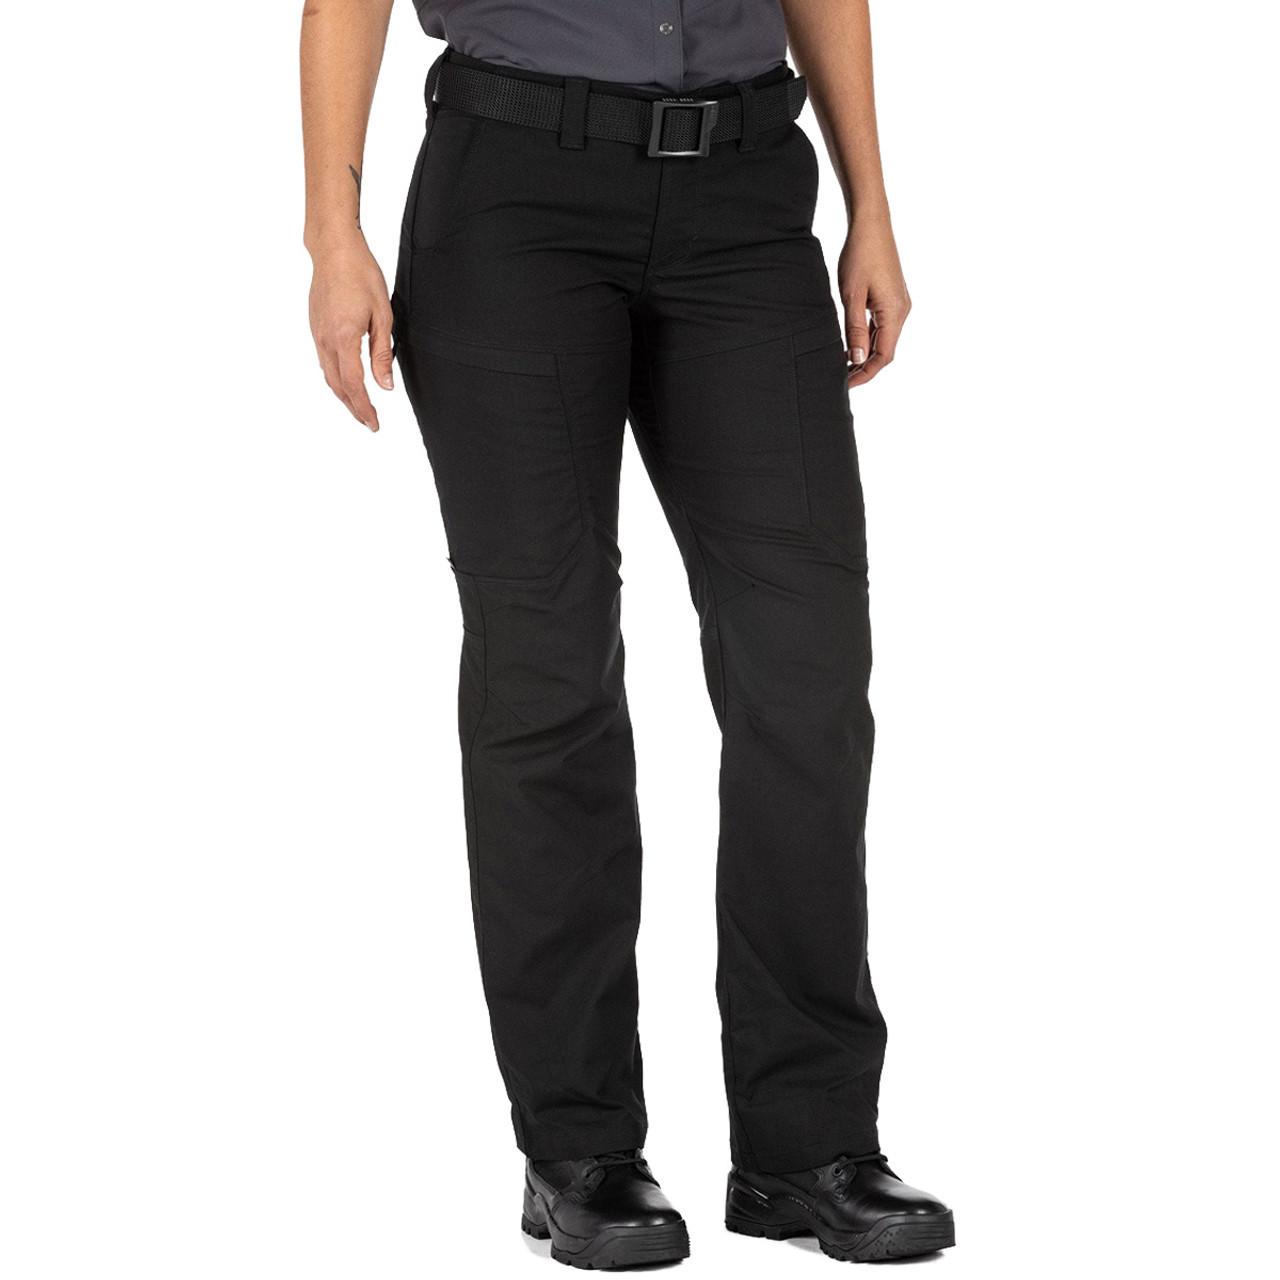 5.11 Tactical Cargo Pants Womens 6 Straight Leg Mid Rise Navy Blue